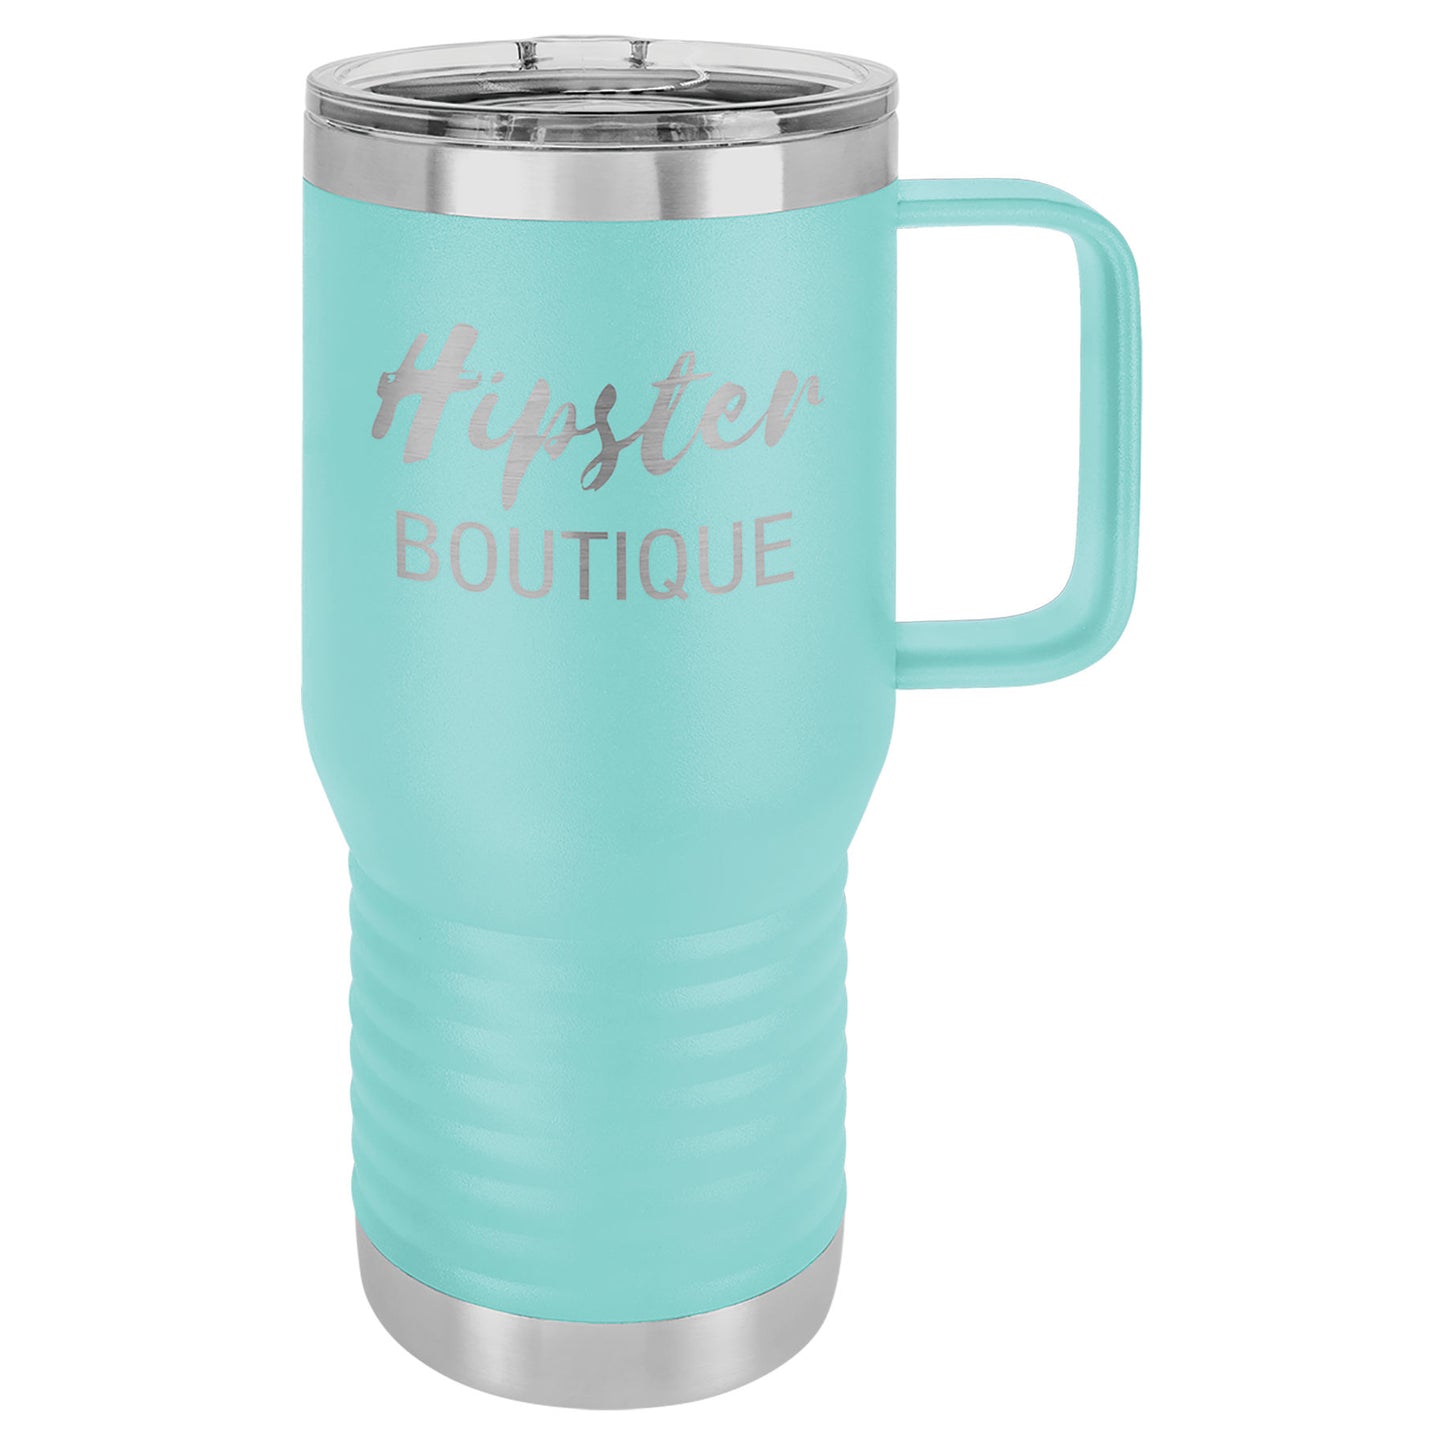 H3 20 oz. Polar Camel Insulated Traveler Coffee Mug with Handle and Slider Lid (Personalized Engraving)